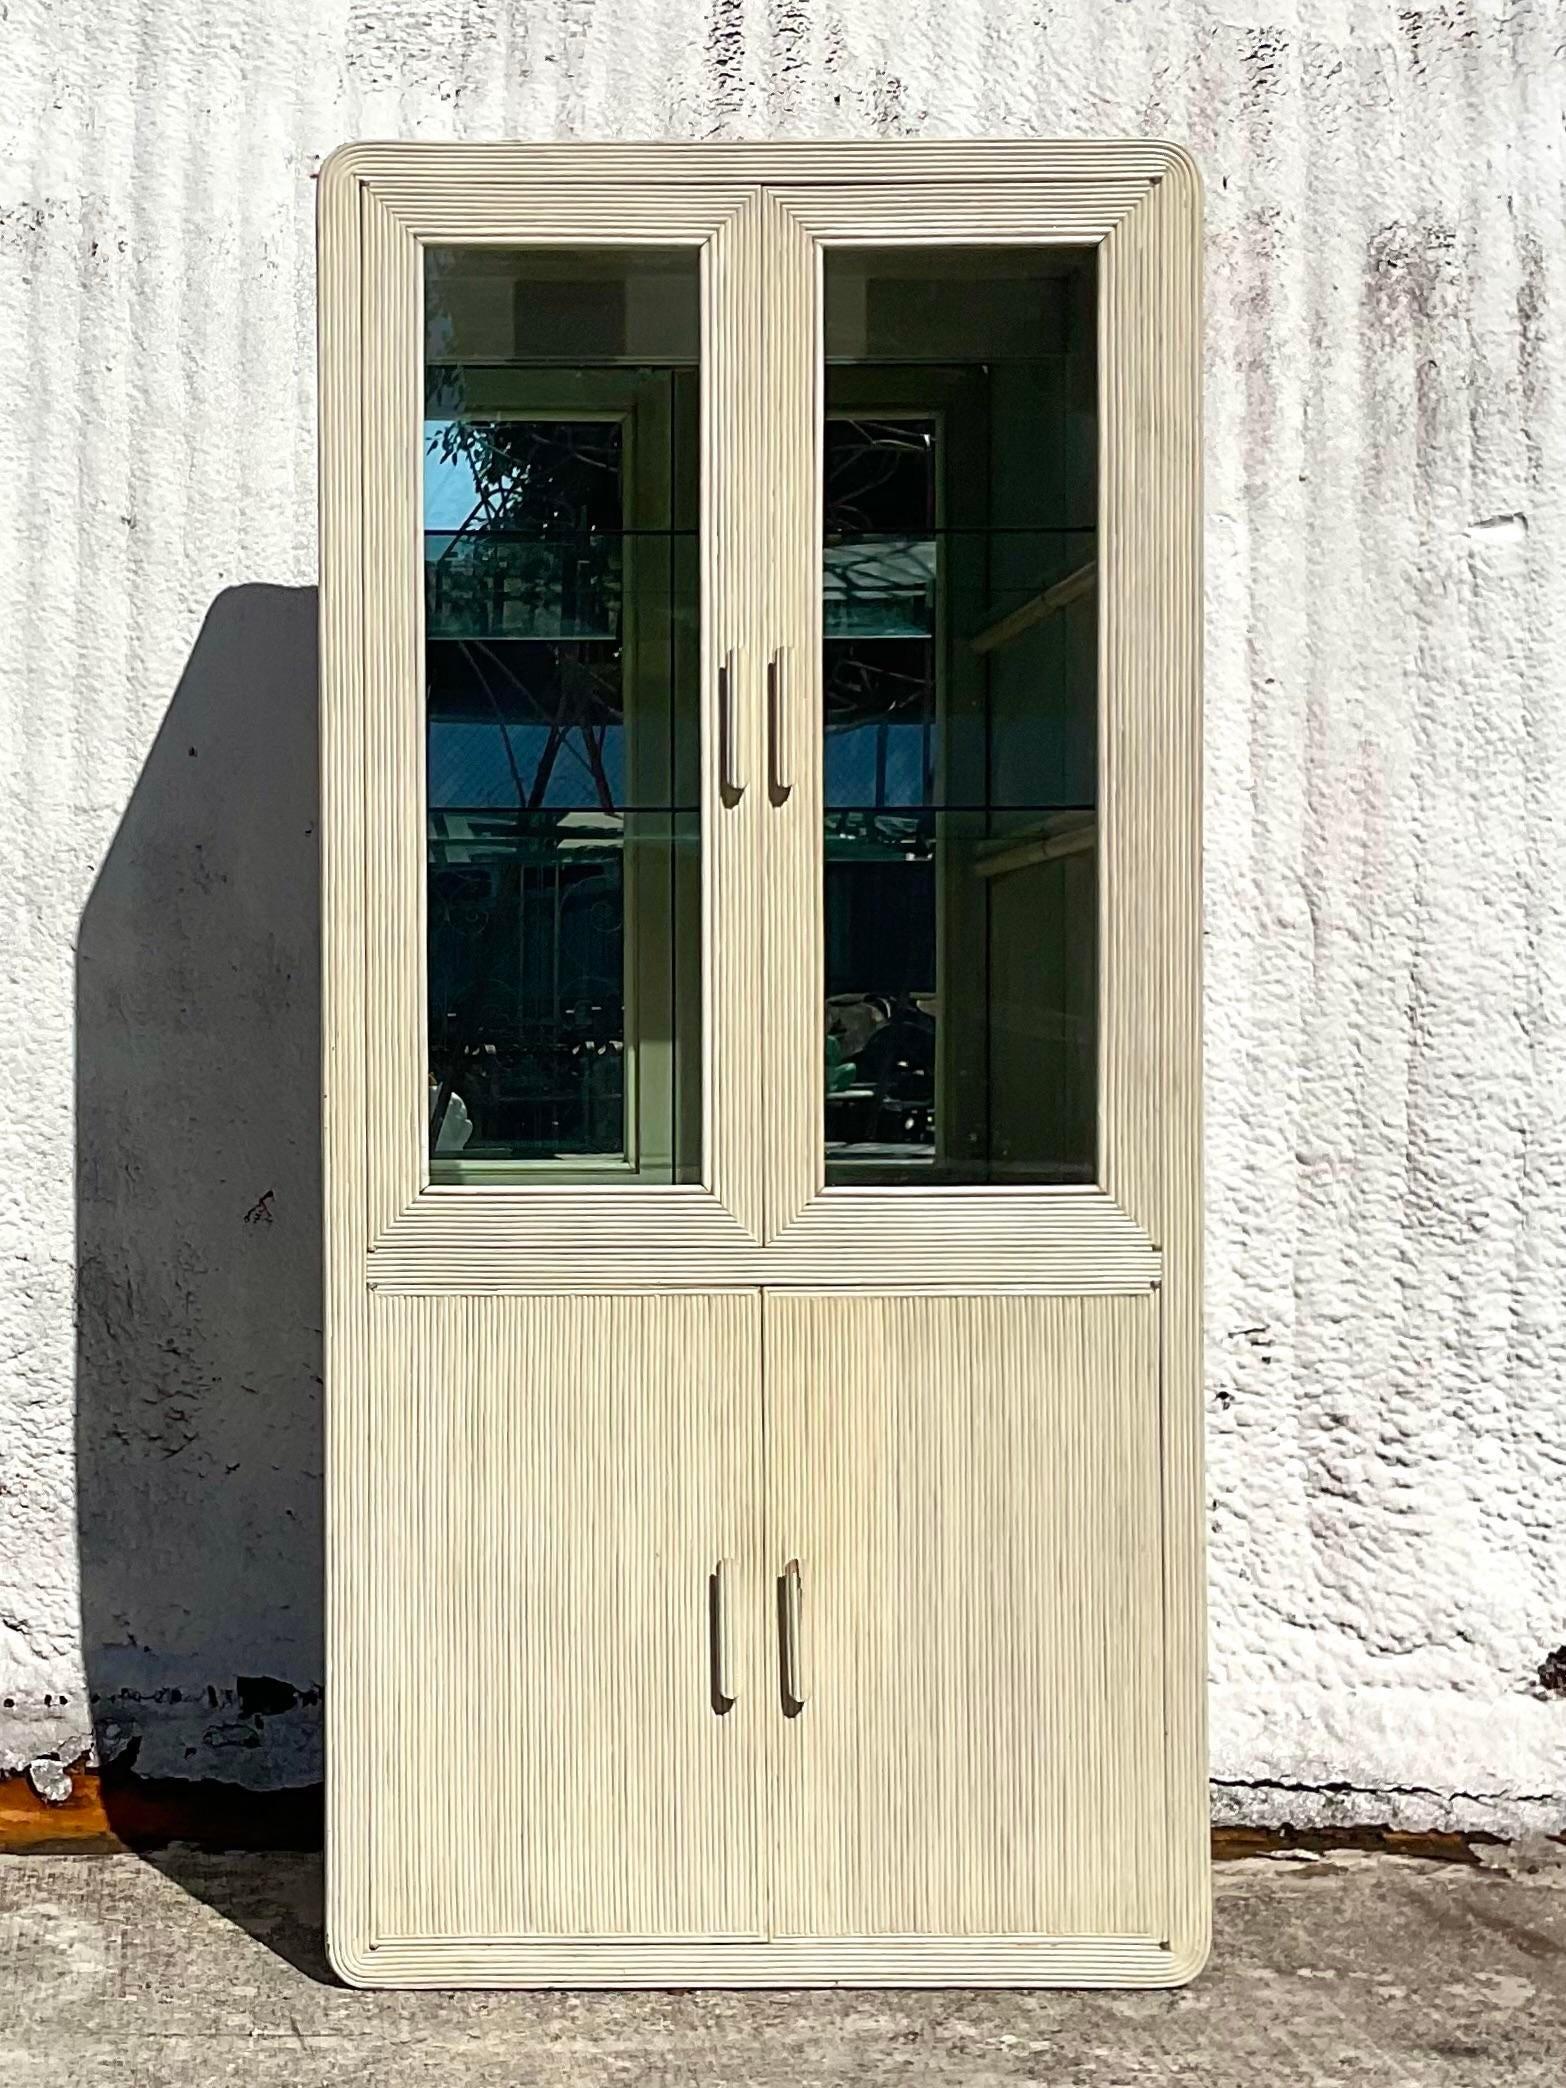 A fabulous vintage Coastal storage cabinet. A chic cerused pencil reed with a stone colored matte finish. Inset glass doors and interior upper glass shelves. Lots of great storage below. Acquired from a Palm Beach estate.